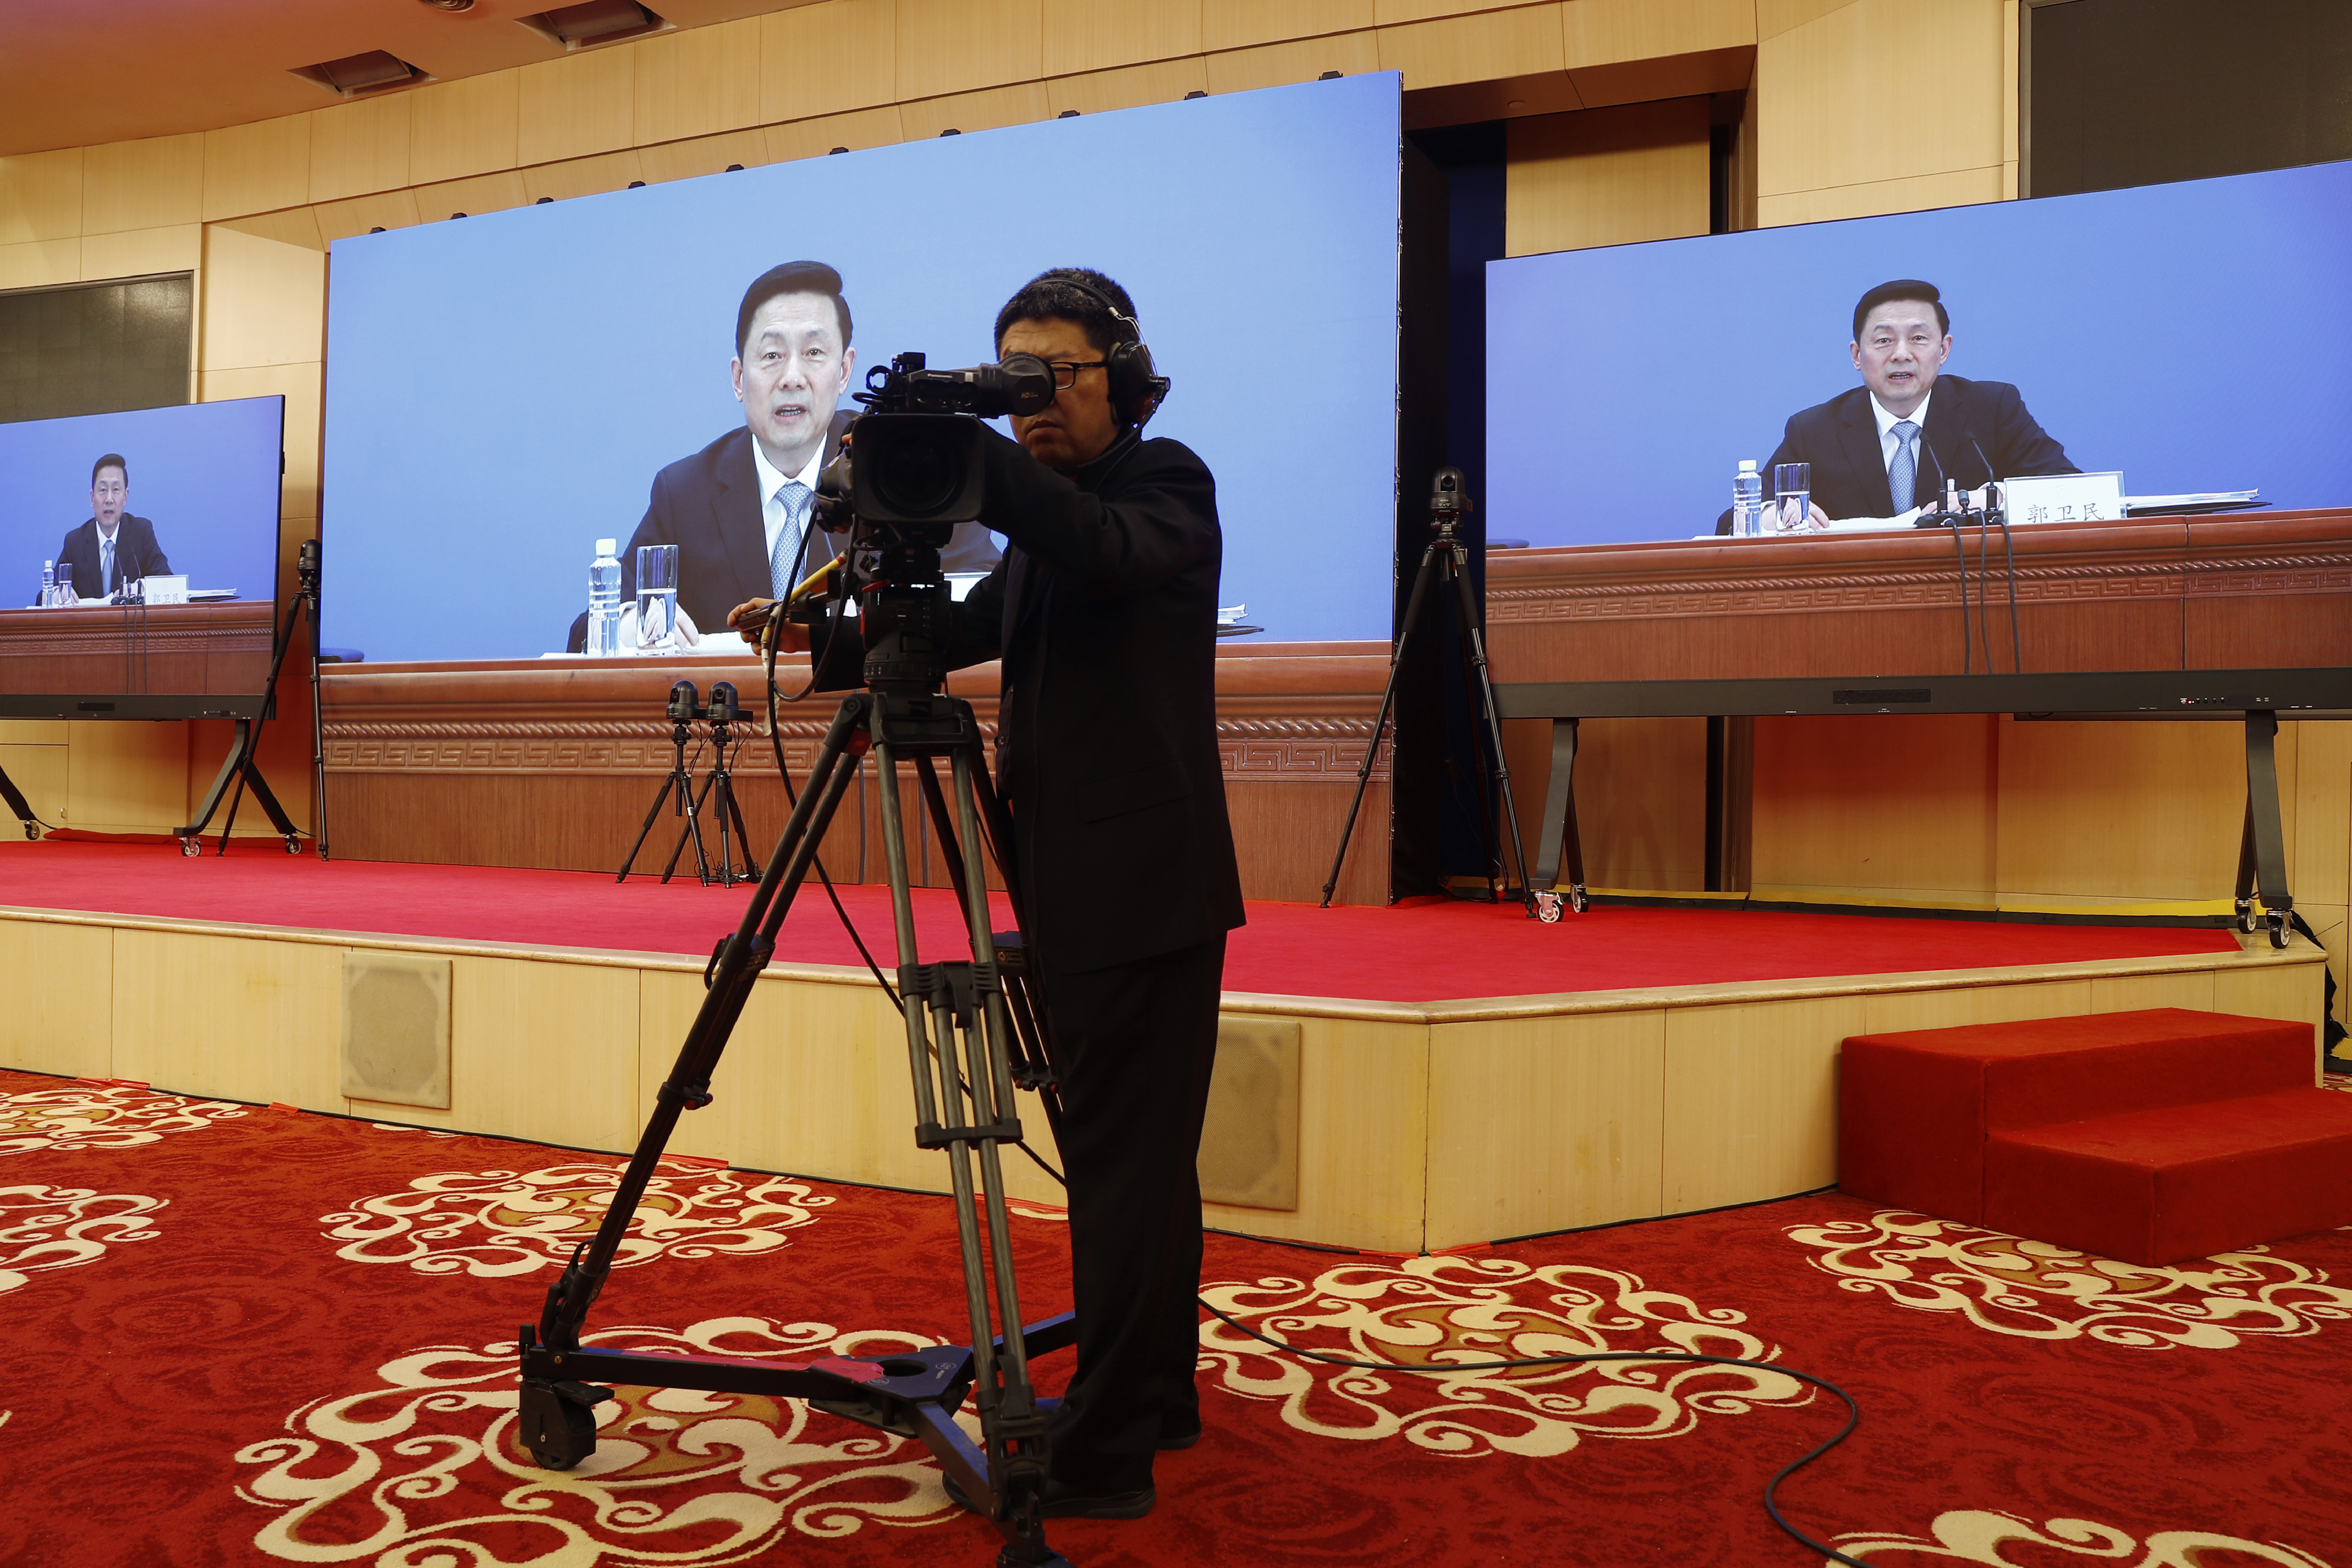 Guo Weimin, spokesman for the National Committee of the Chinese People's Political Consultative Conference (CPPCC), is seen on screens during a news conference broadcasted at a media center in Beijing, Wednesday, May 20, 2020. (Thomas Peter/Pool Photo via AP)